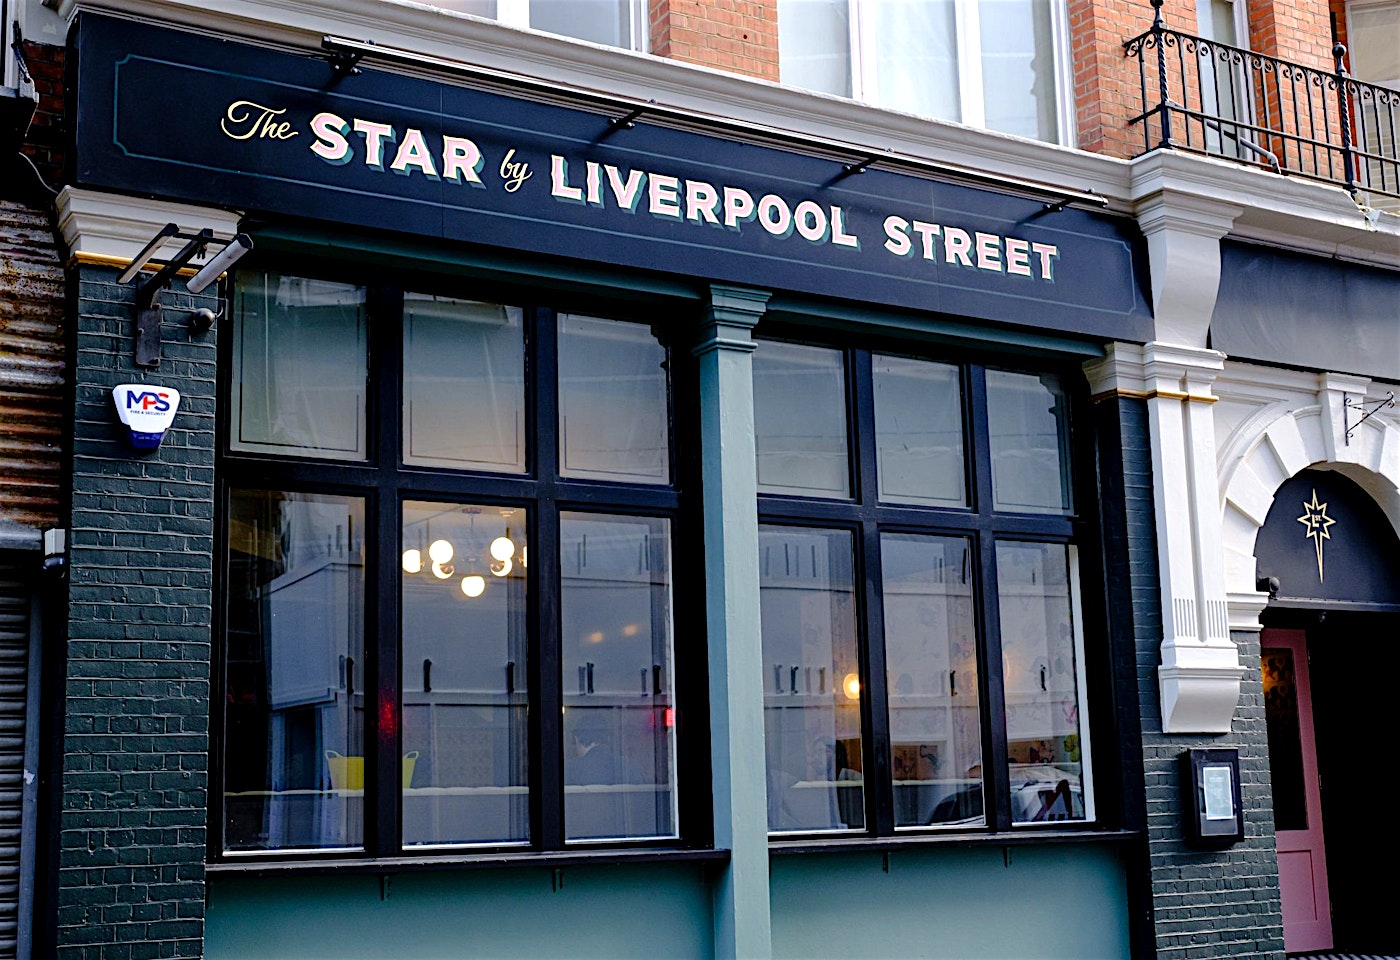 The Star by Liverpool Street